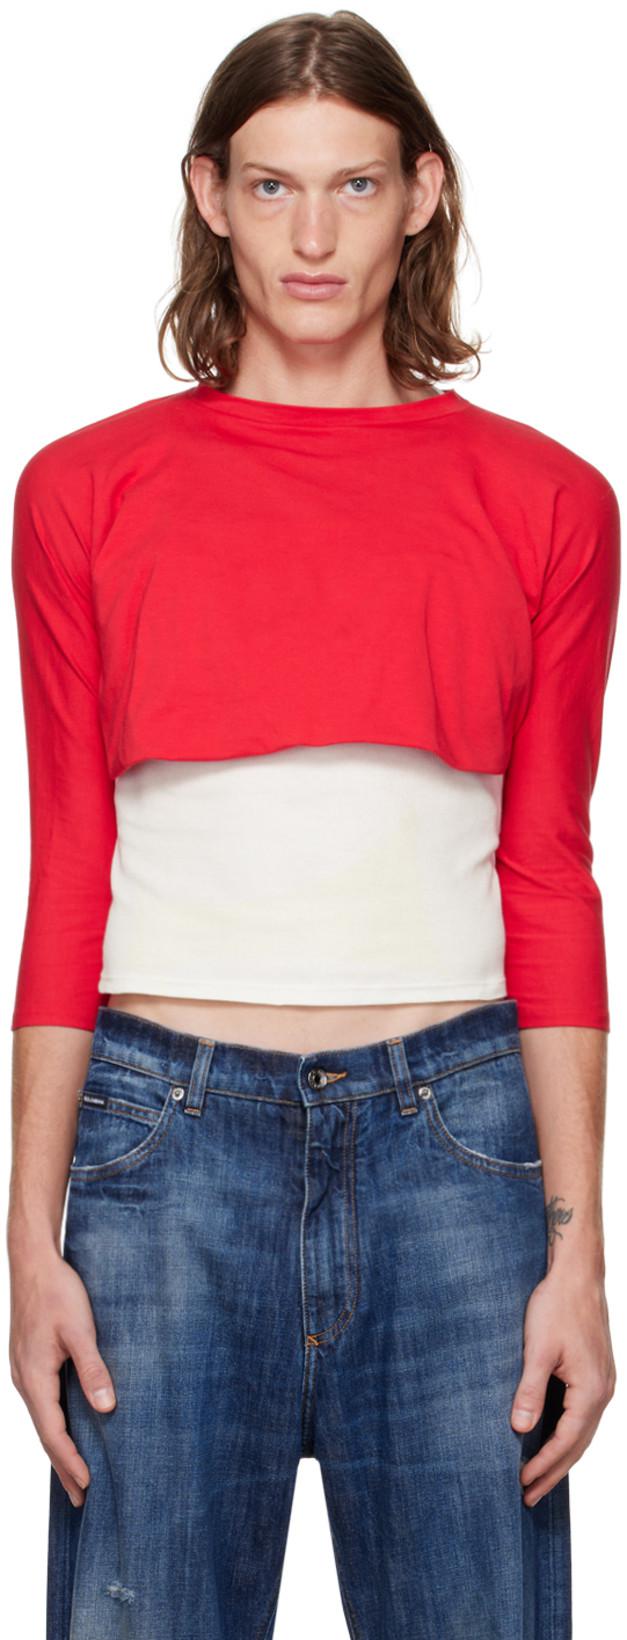 Red & White Layered Long Sleeve T-Shirt by ALLED-MARTINEZ